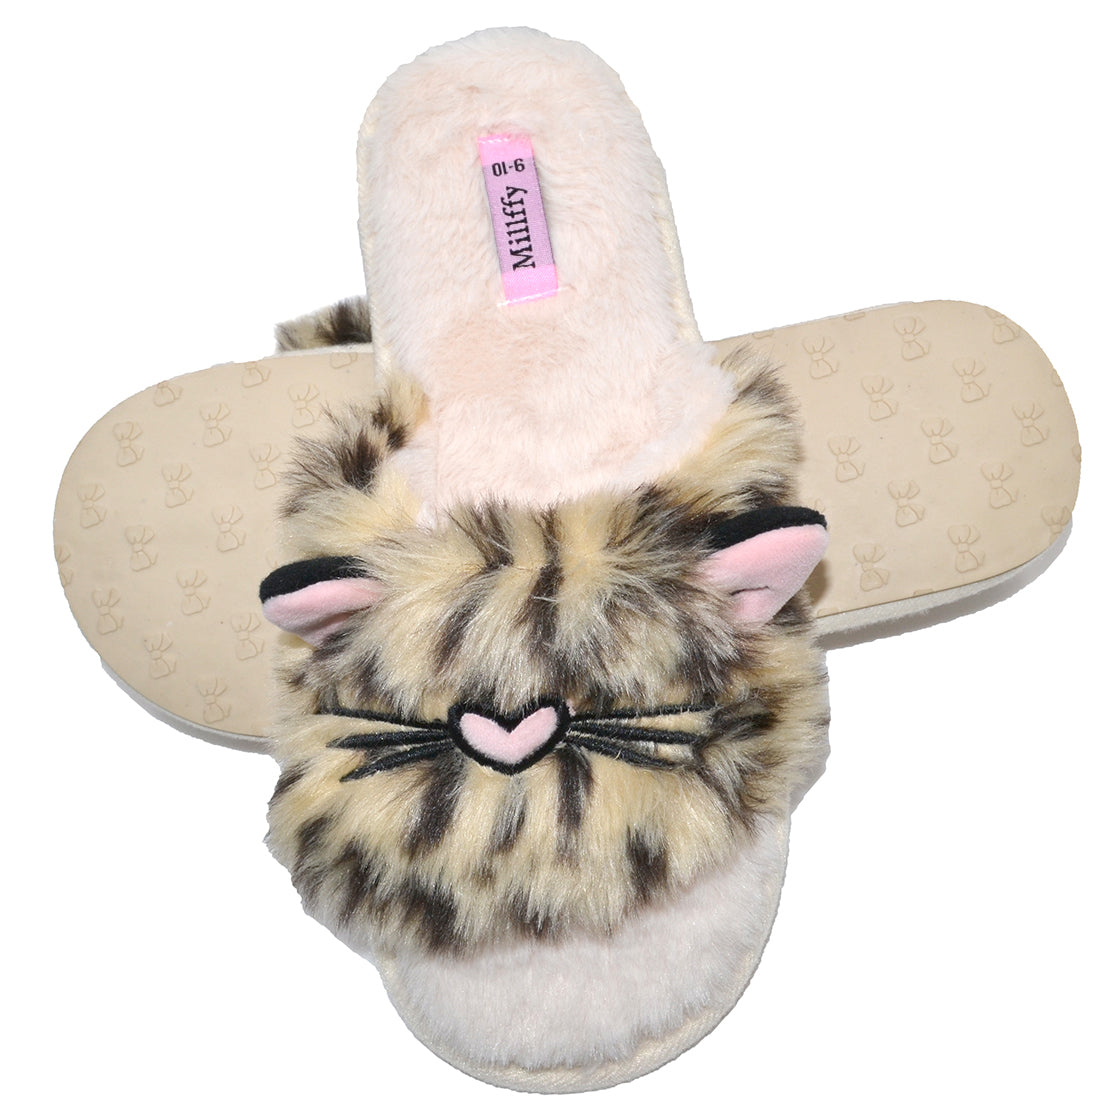 Millffy fuzzy fluffy open toe slippers for Women cat puppy Thong Slides flip flop slippers